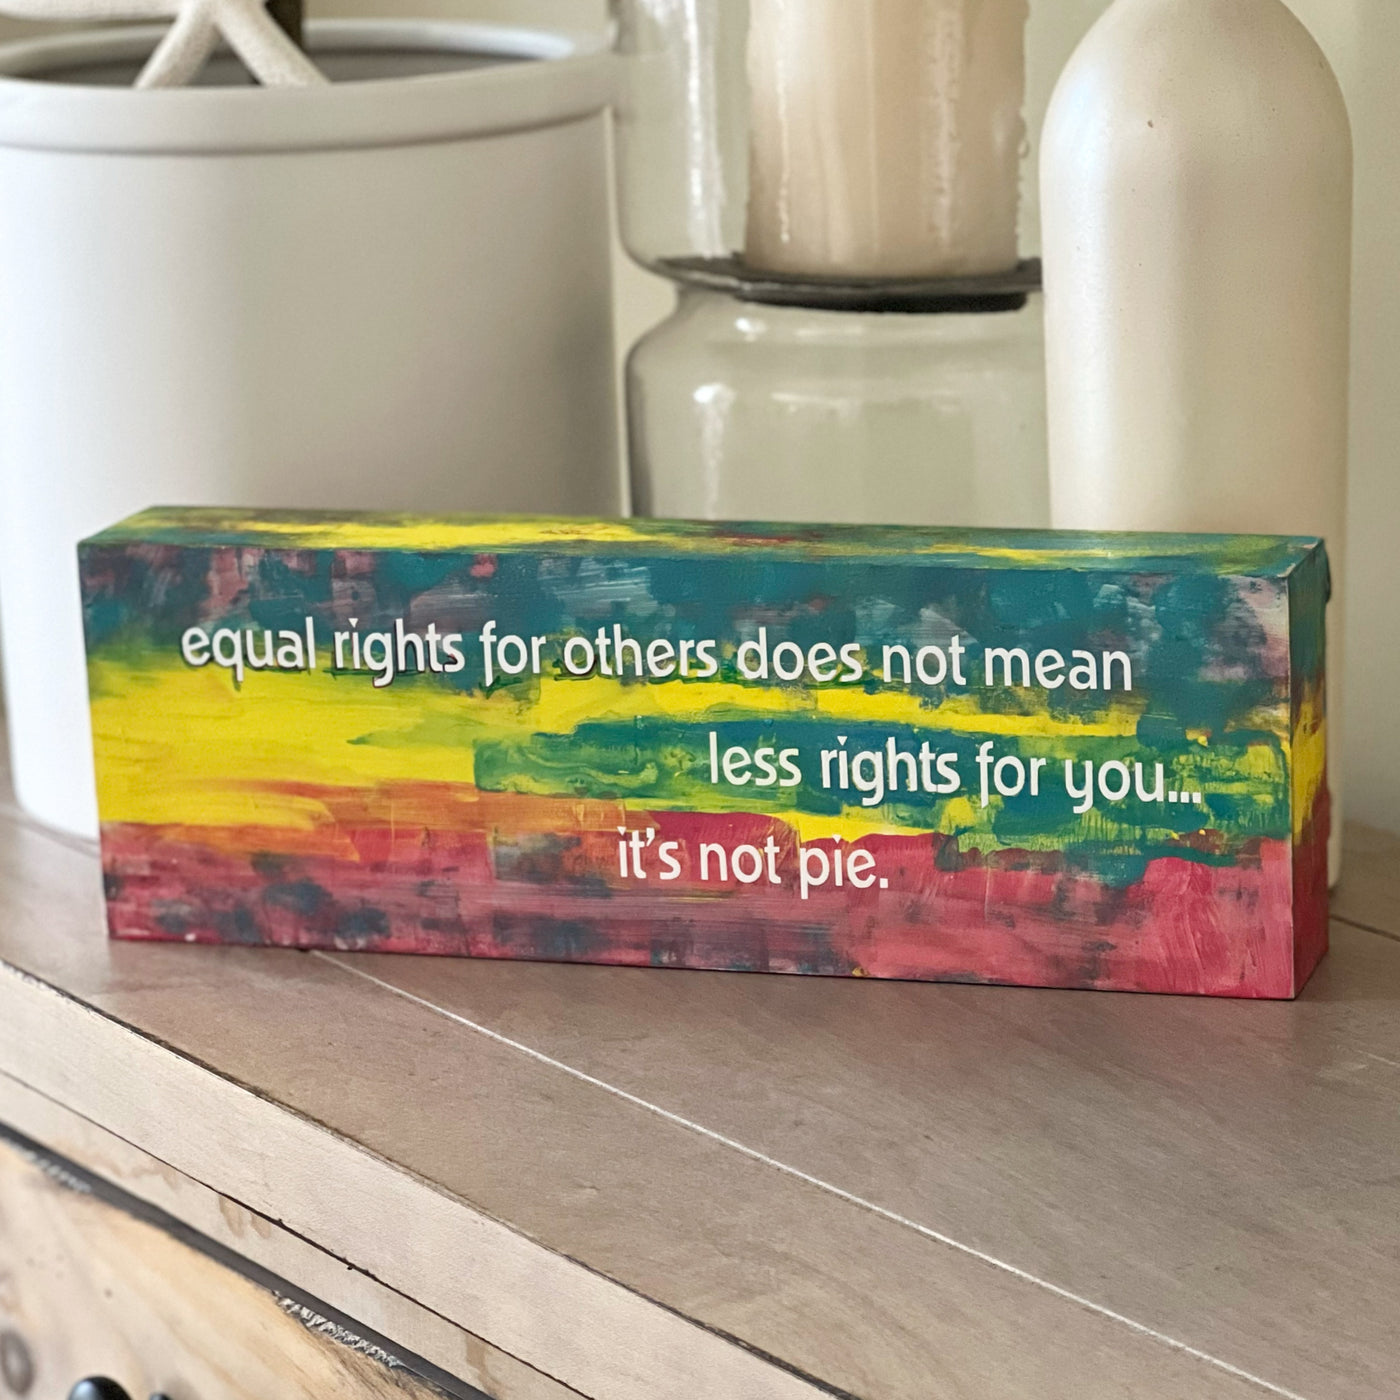 equal rights are not pie - wood panel art